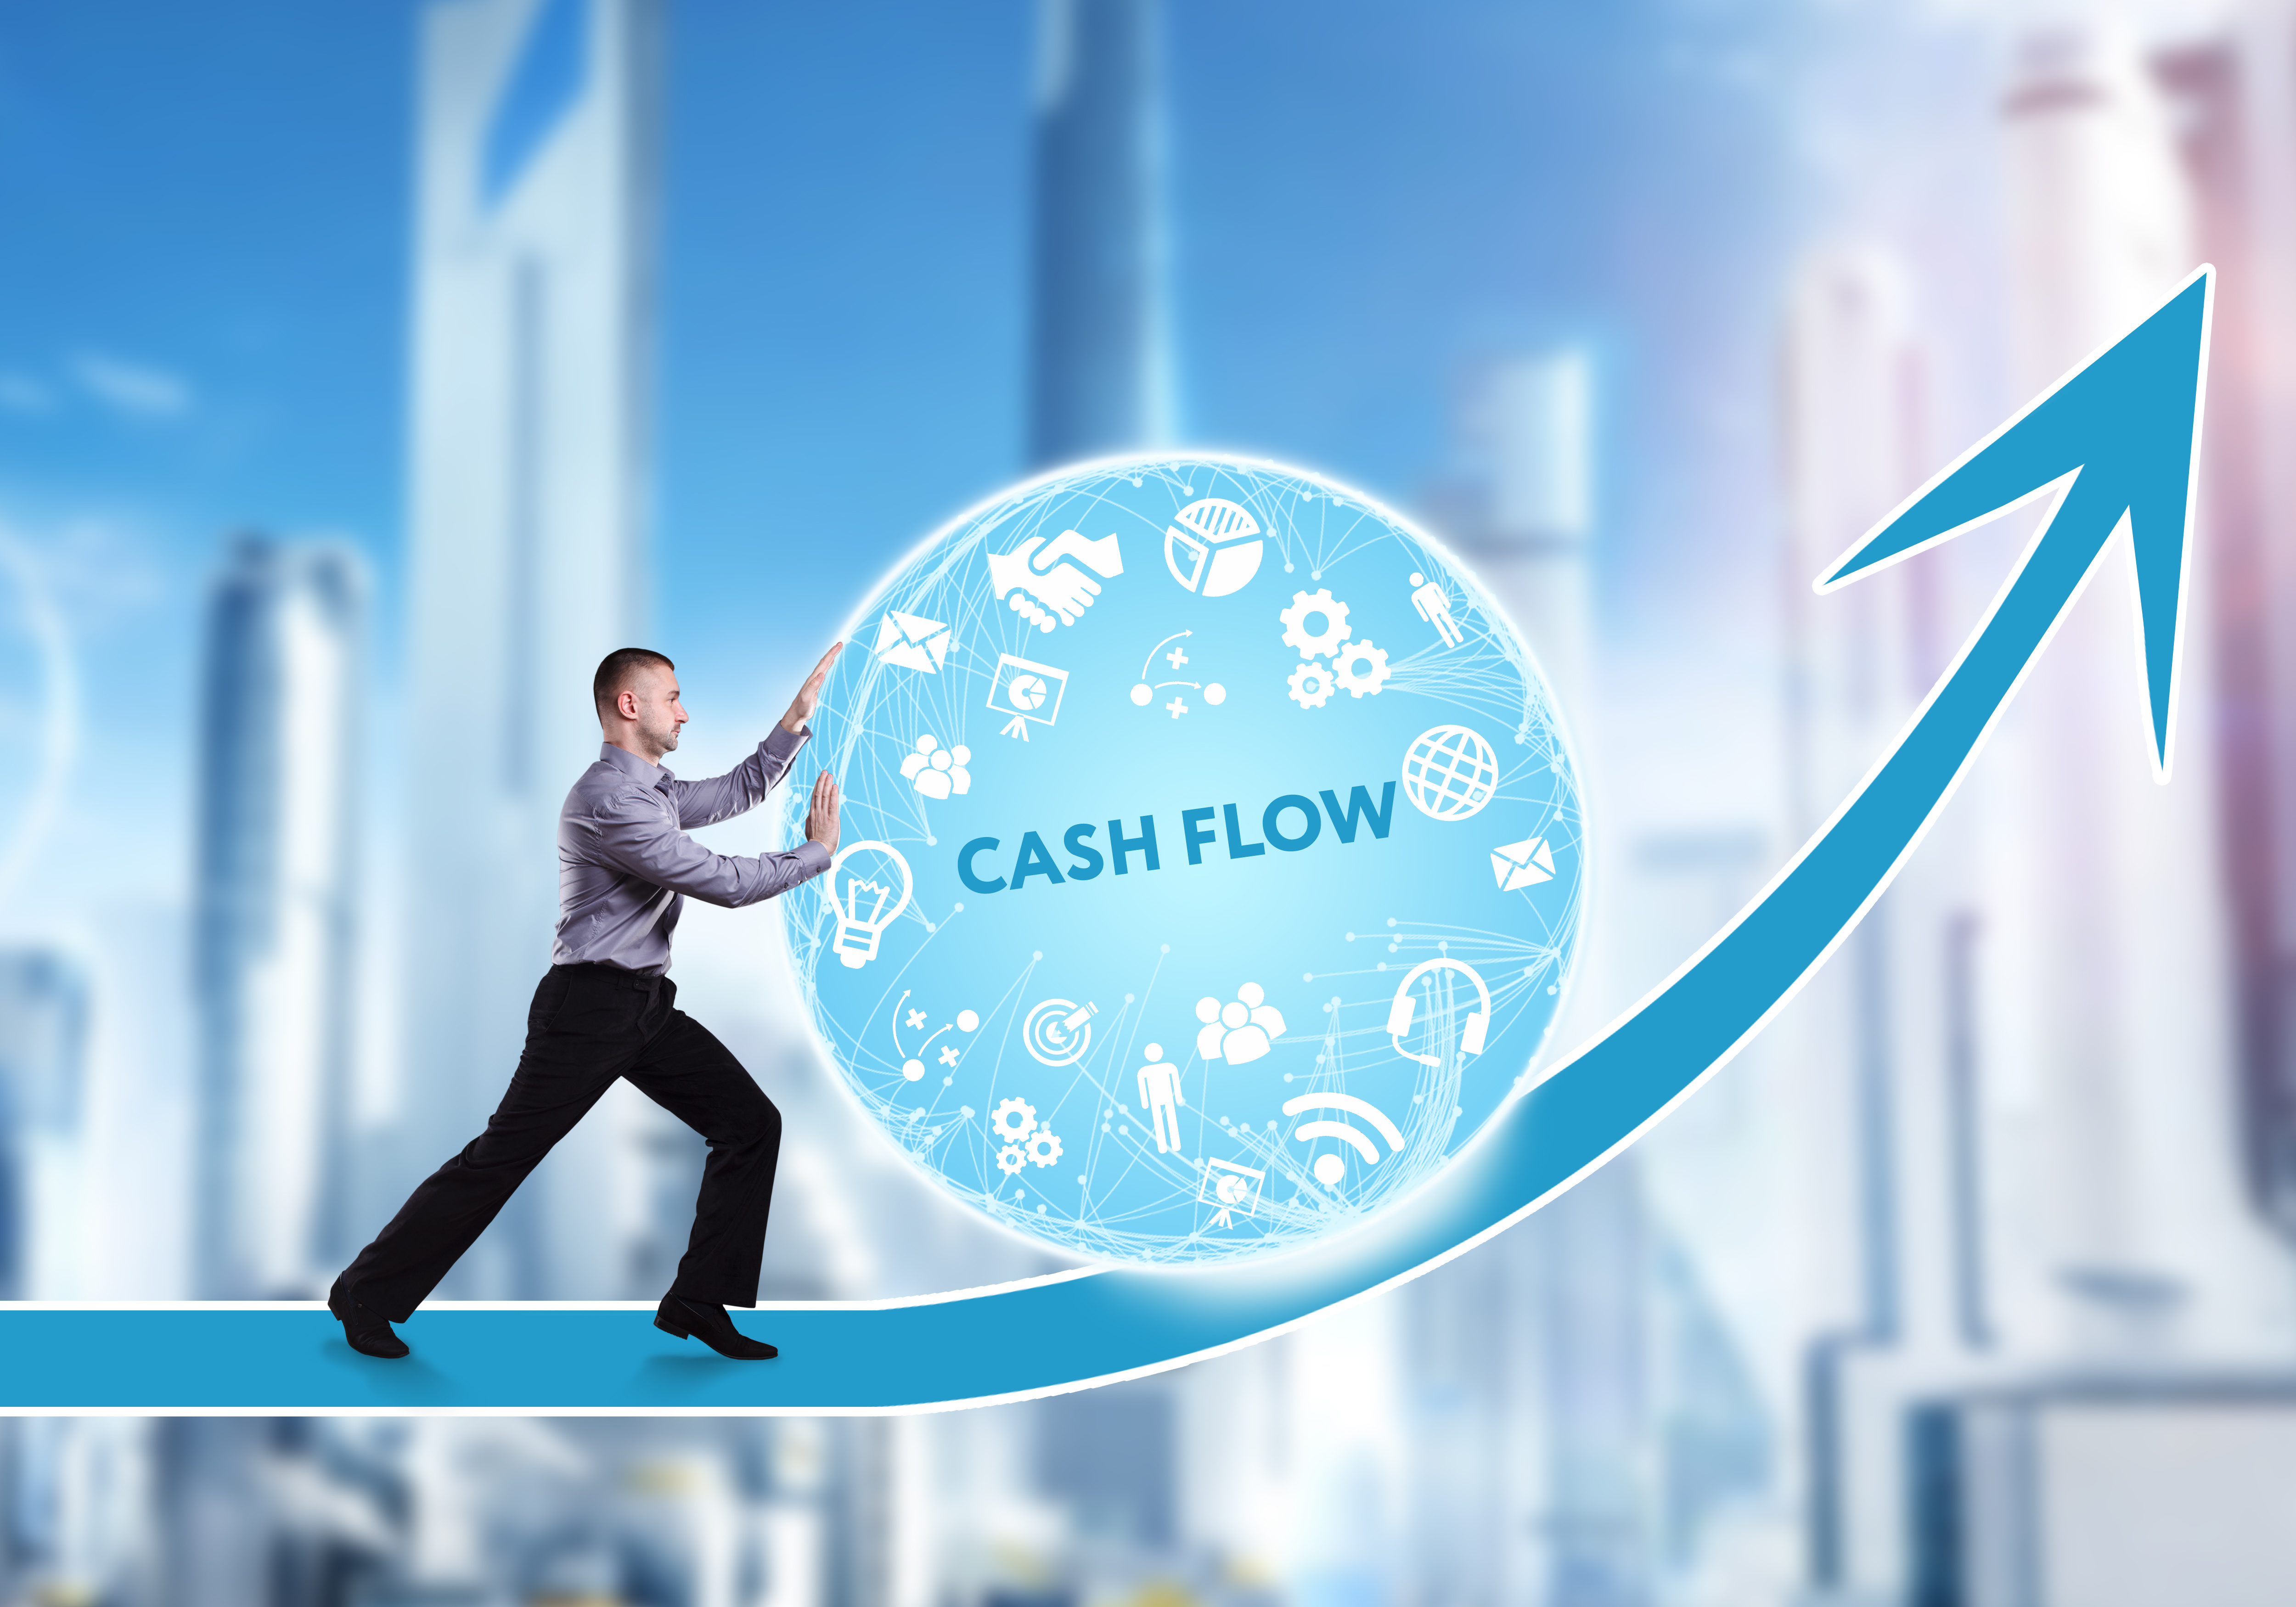 A young businessman overcomes an obstacle to success: Cash flow